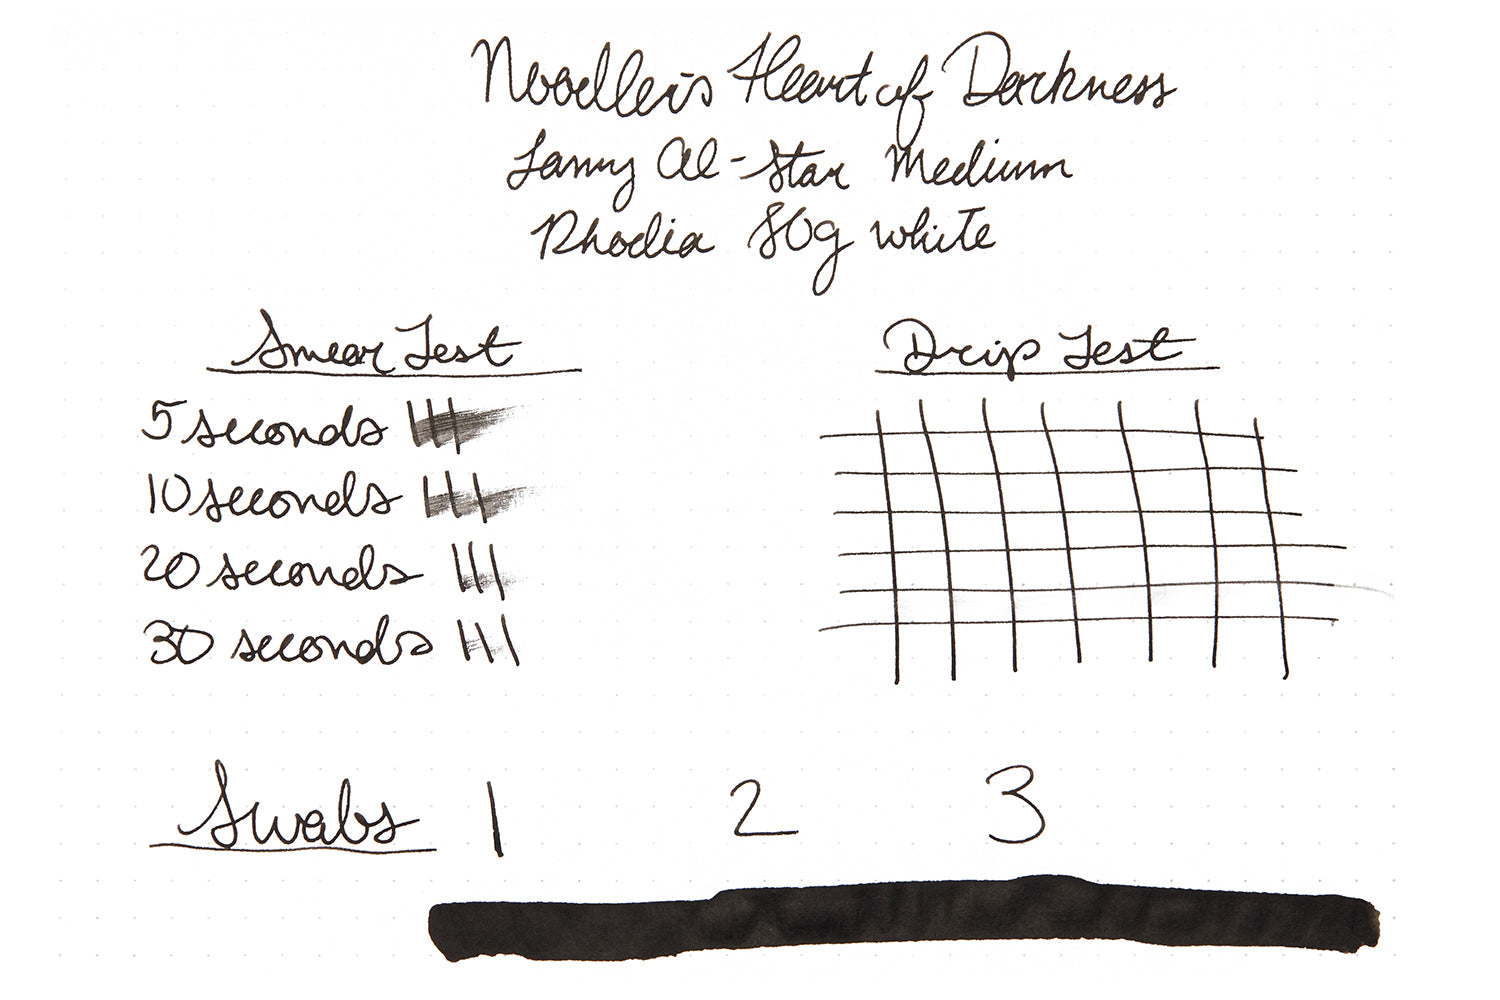 Noodler's Heart of Darkness Rhodia Writing Sample